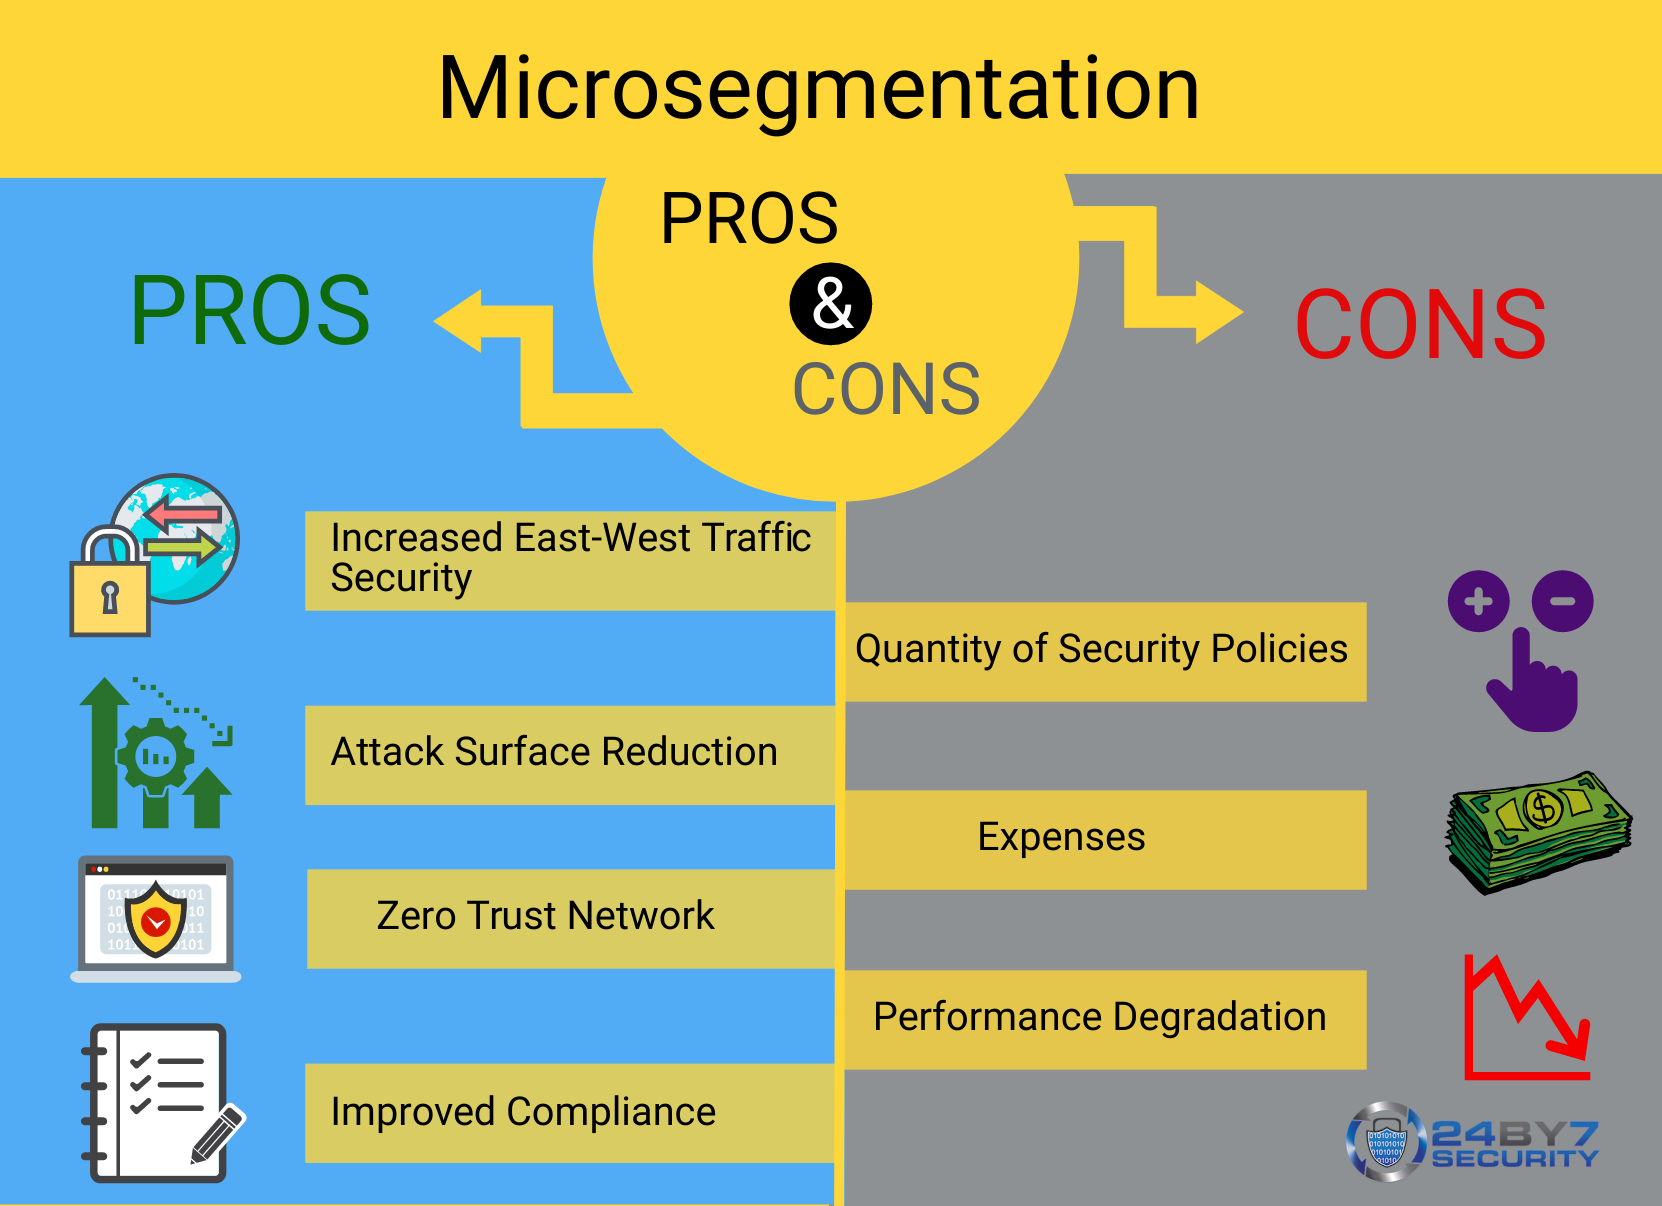 microsegmentation advantages and disadvantages - infographic from 24By7Security